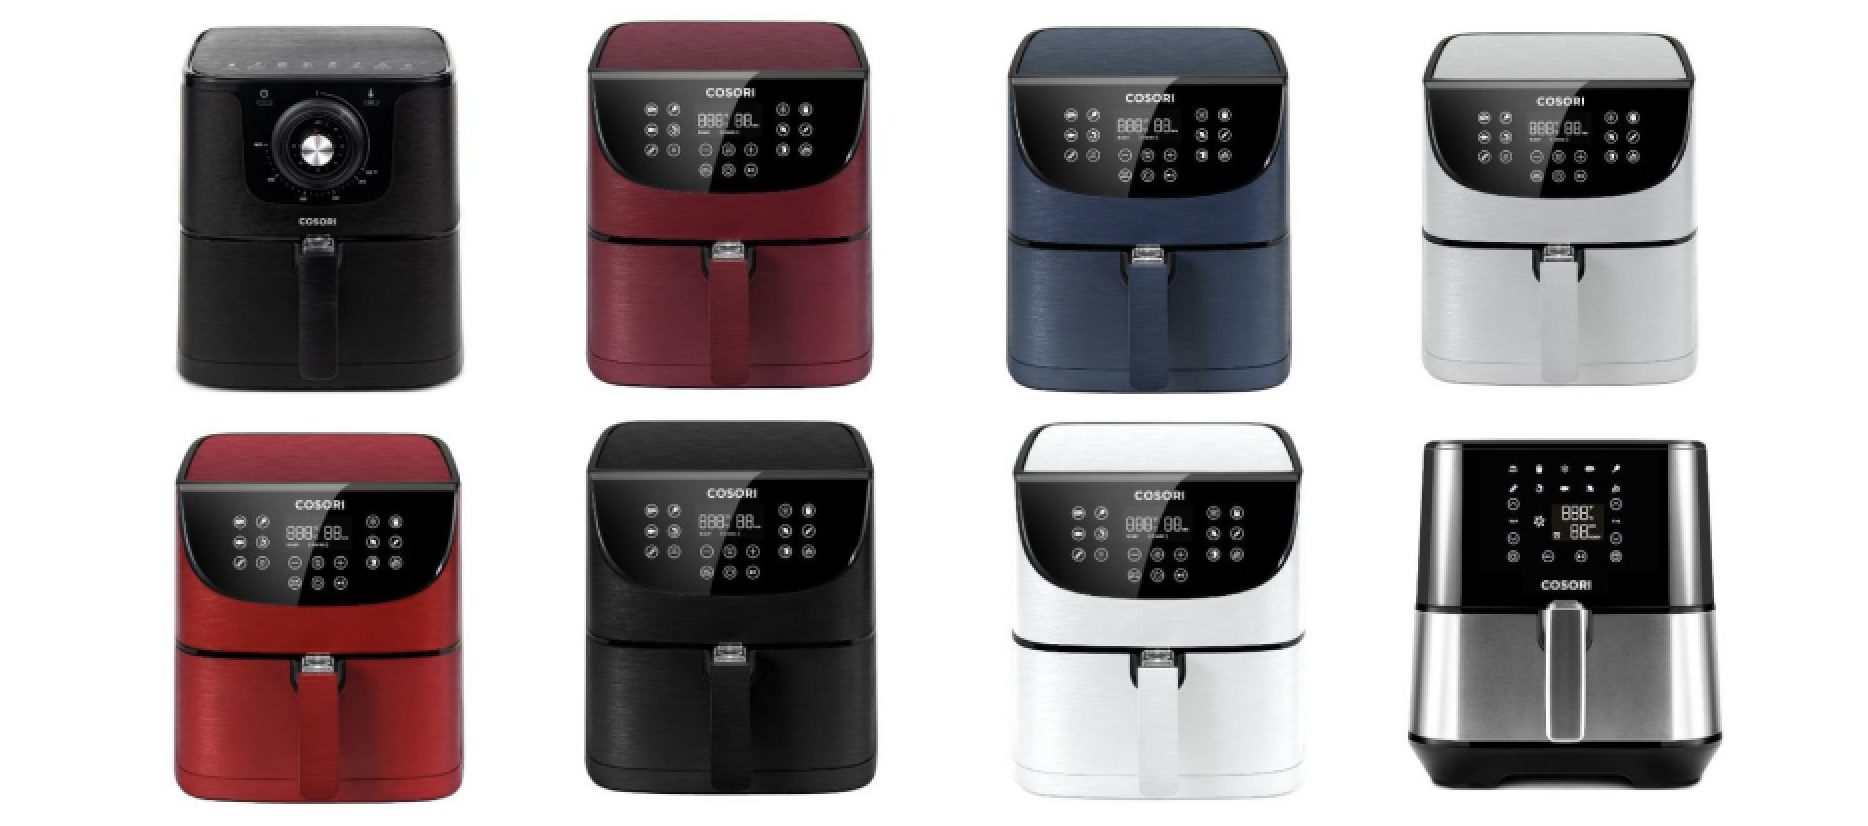 Image shows eight colors/models of the Cosori Air Fryer